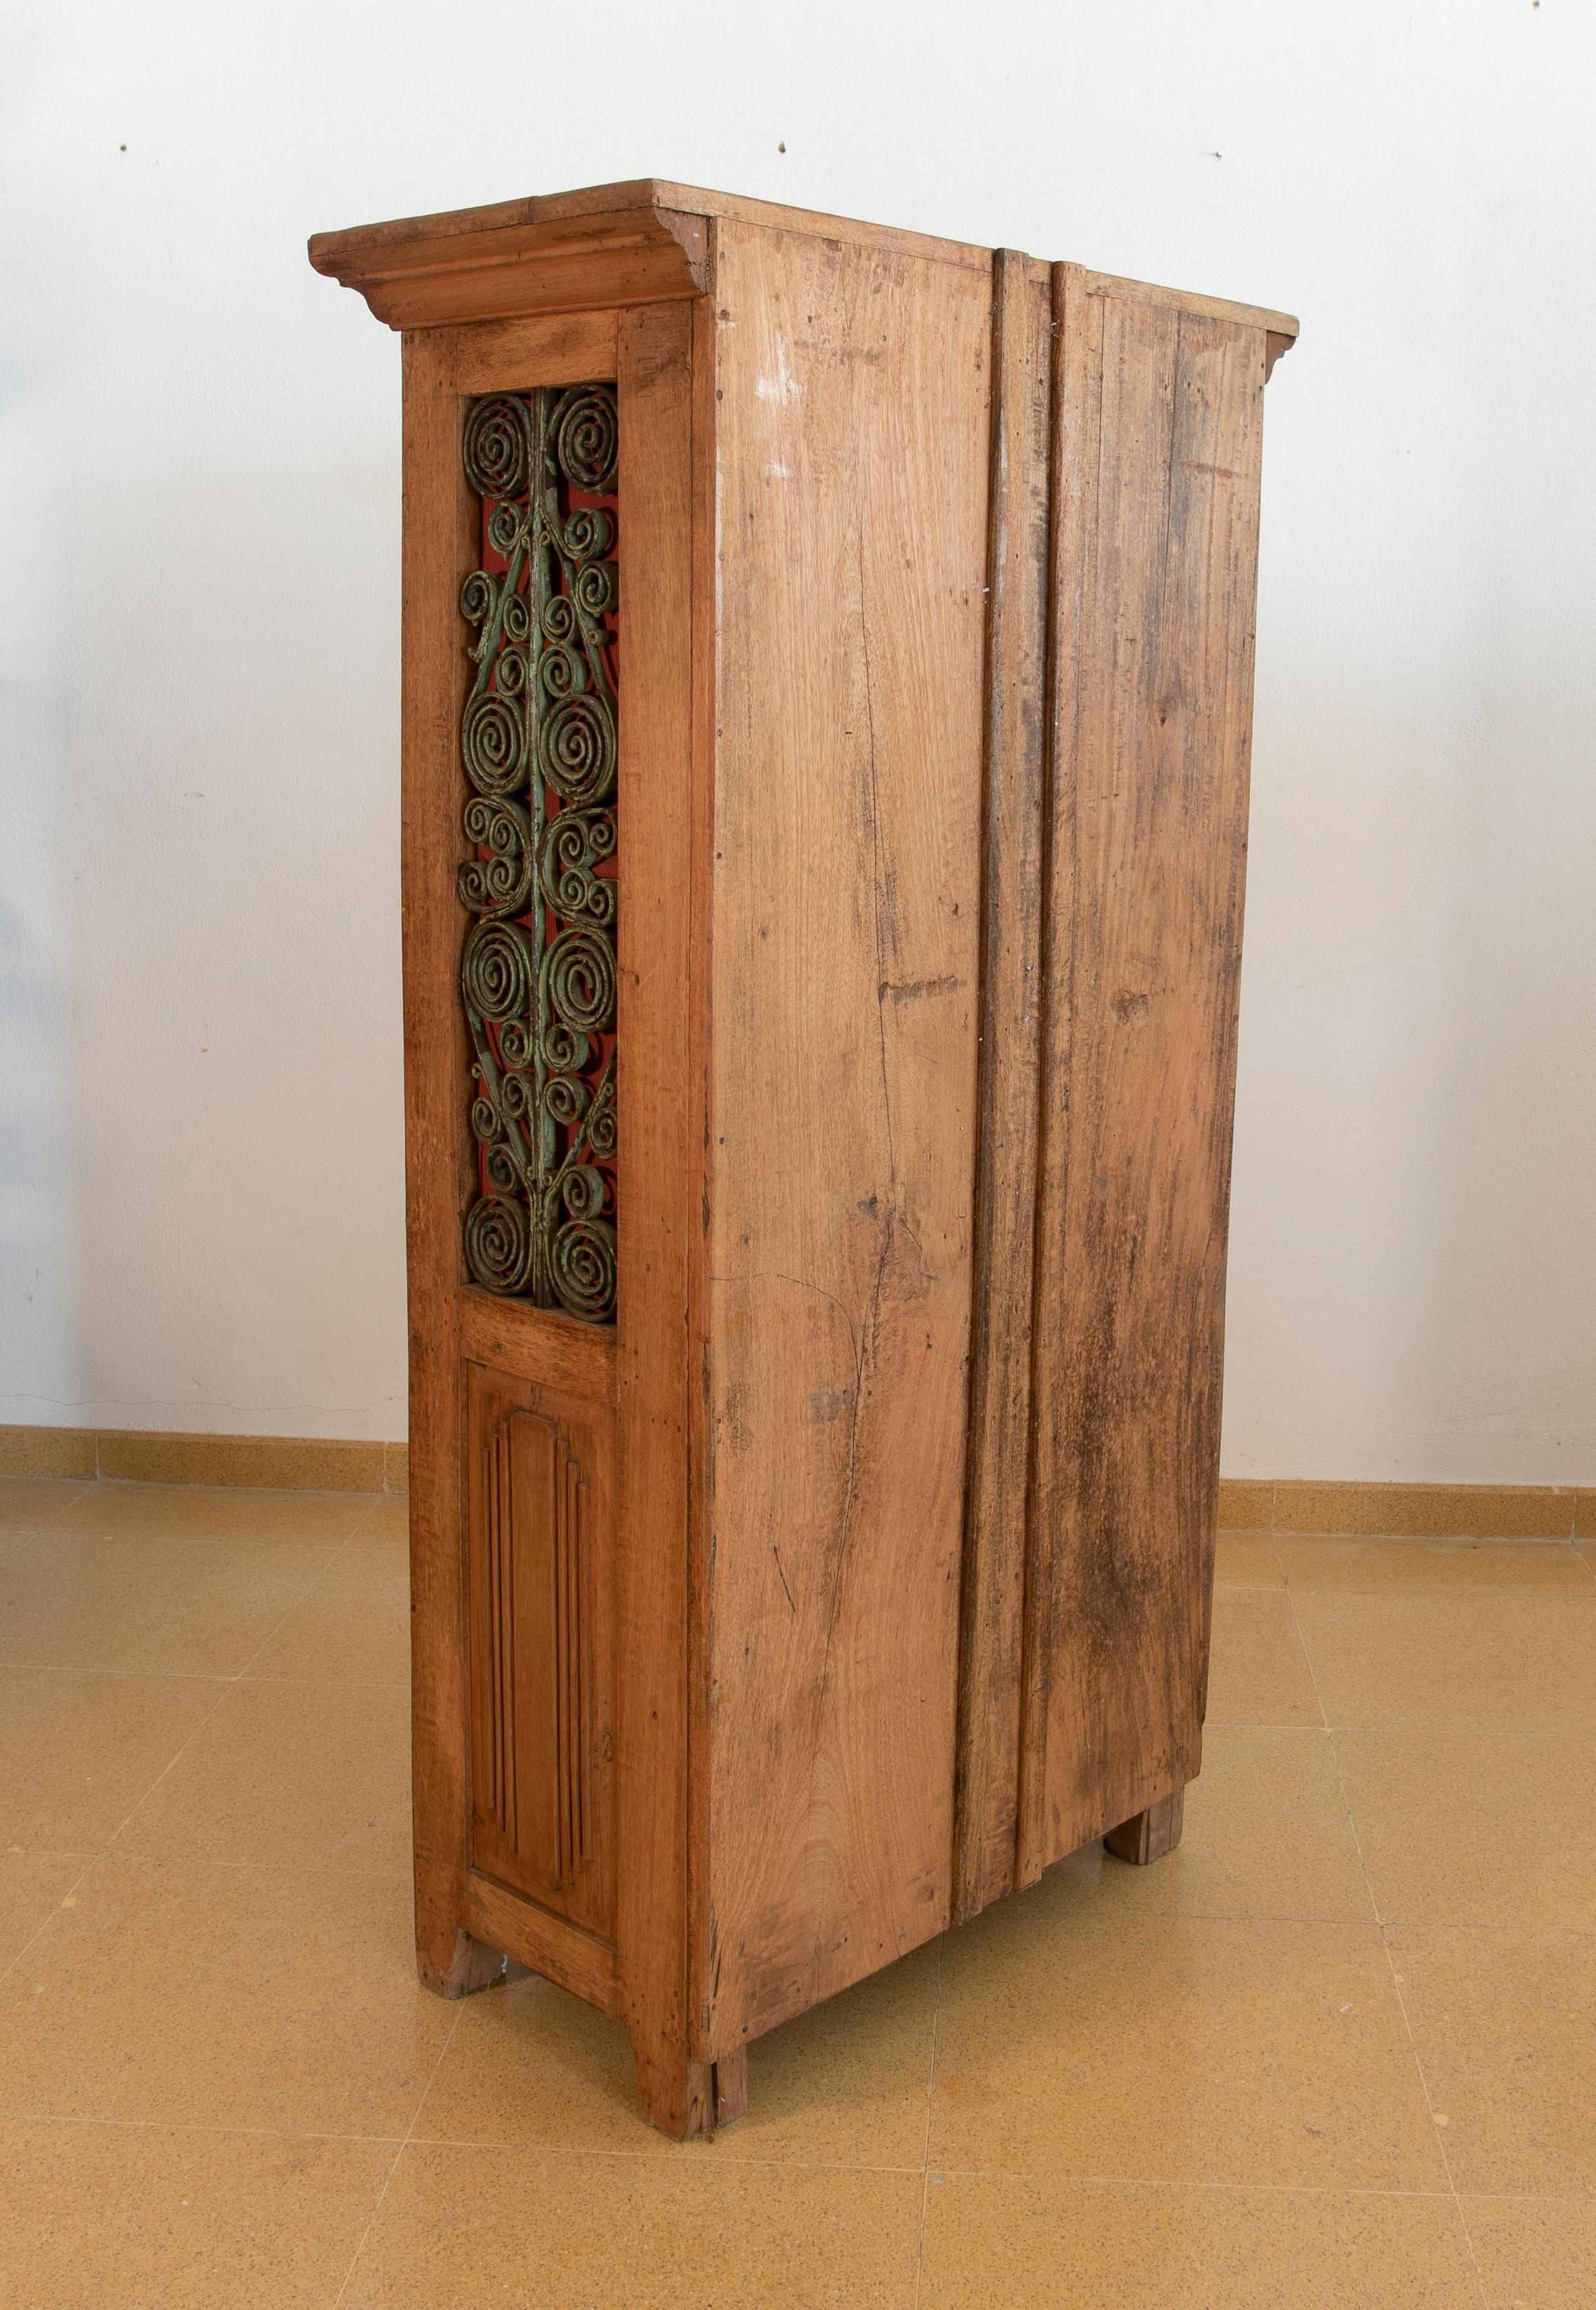 20th Century Wooden Wardrobe with Iron Decorated Doors and Three Drawers For Sale